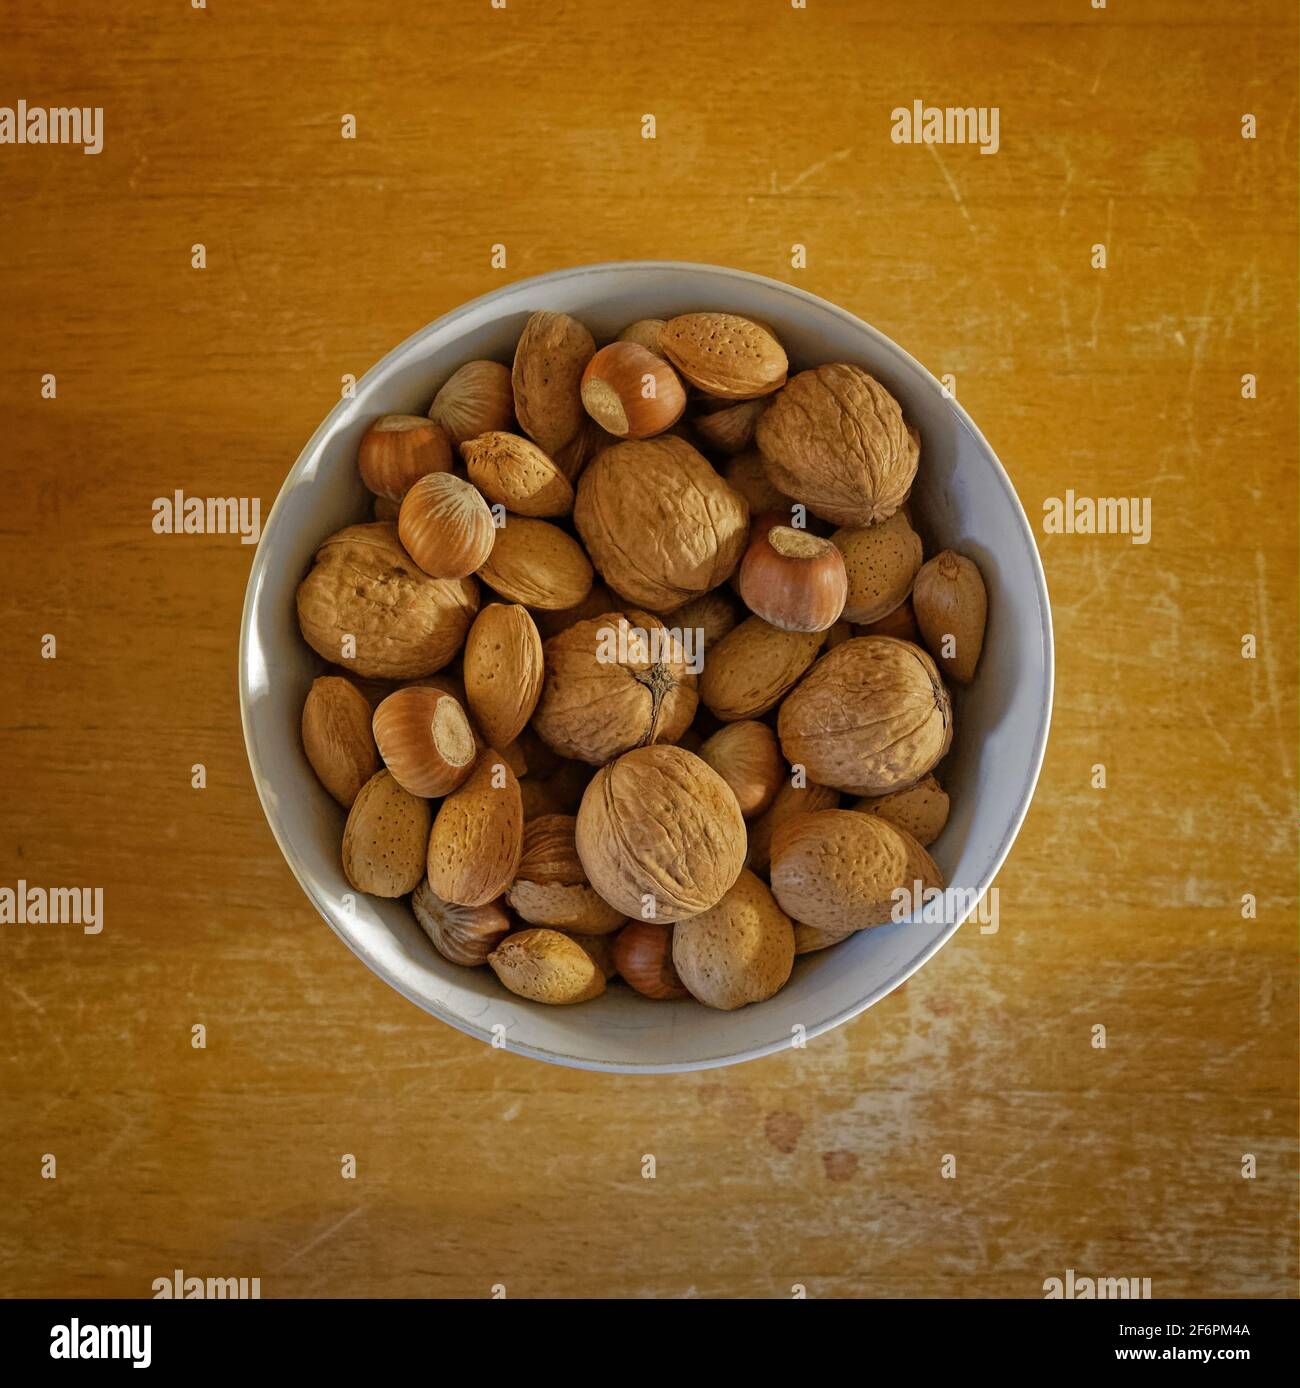 White bowl of unshelled nuts on a worn wooden table, seen from above. Stock Photo